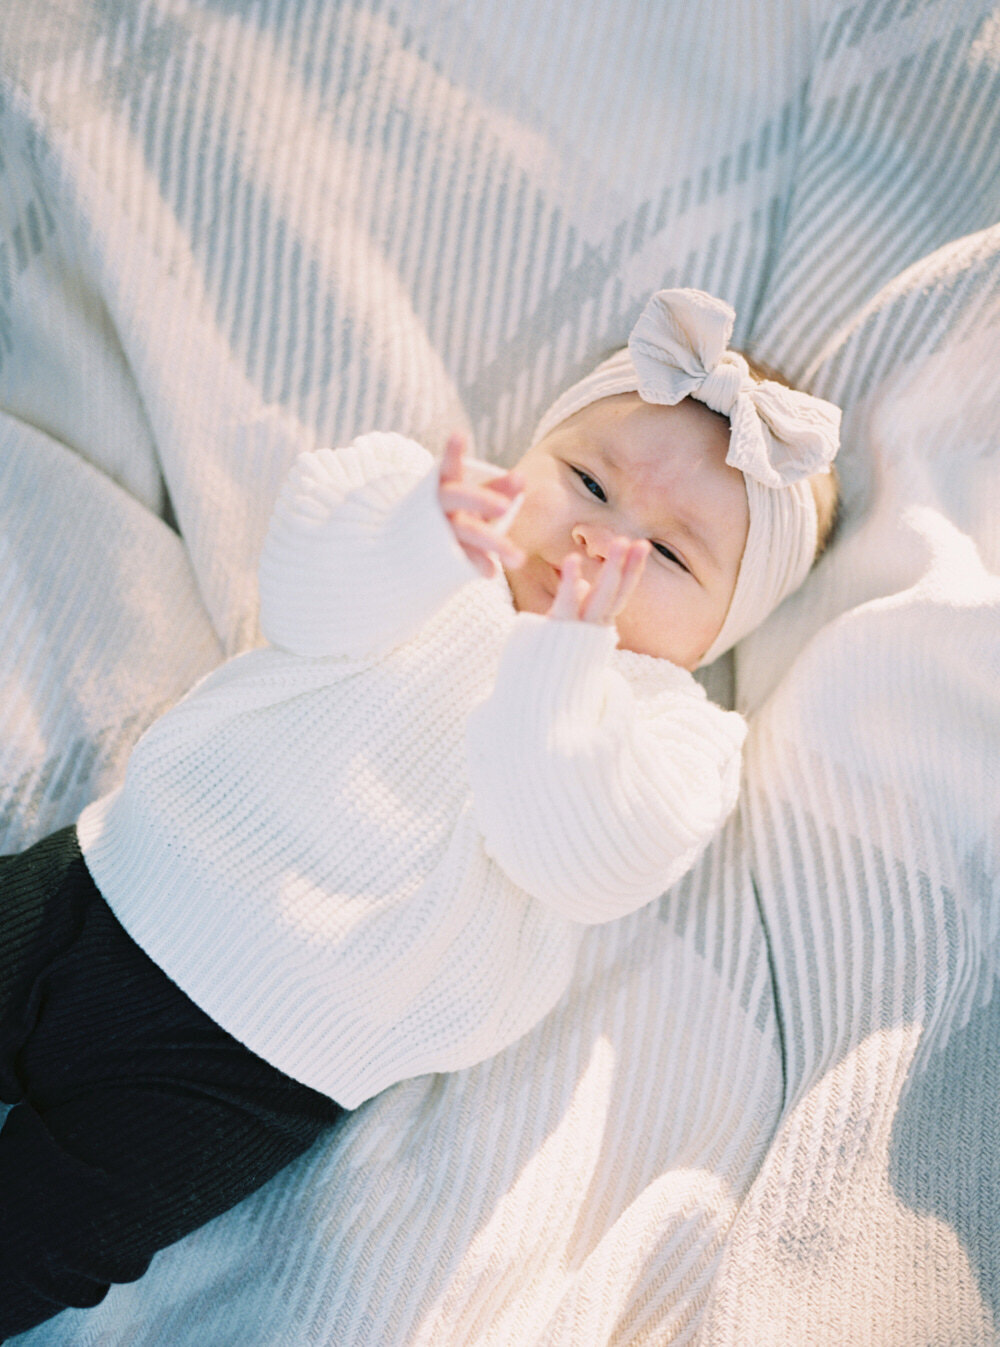 newborn baby girl sleeping on the blanket during family photo session